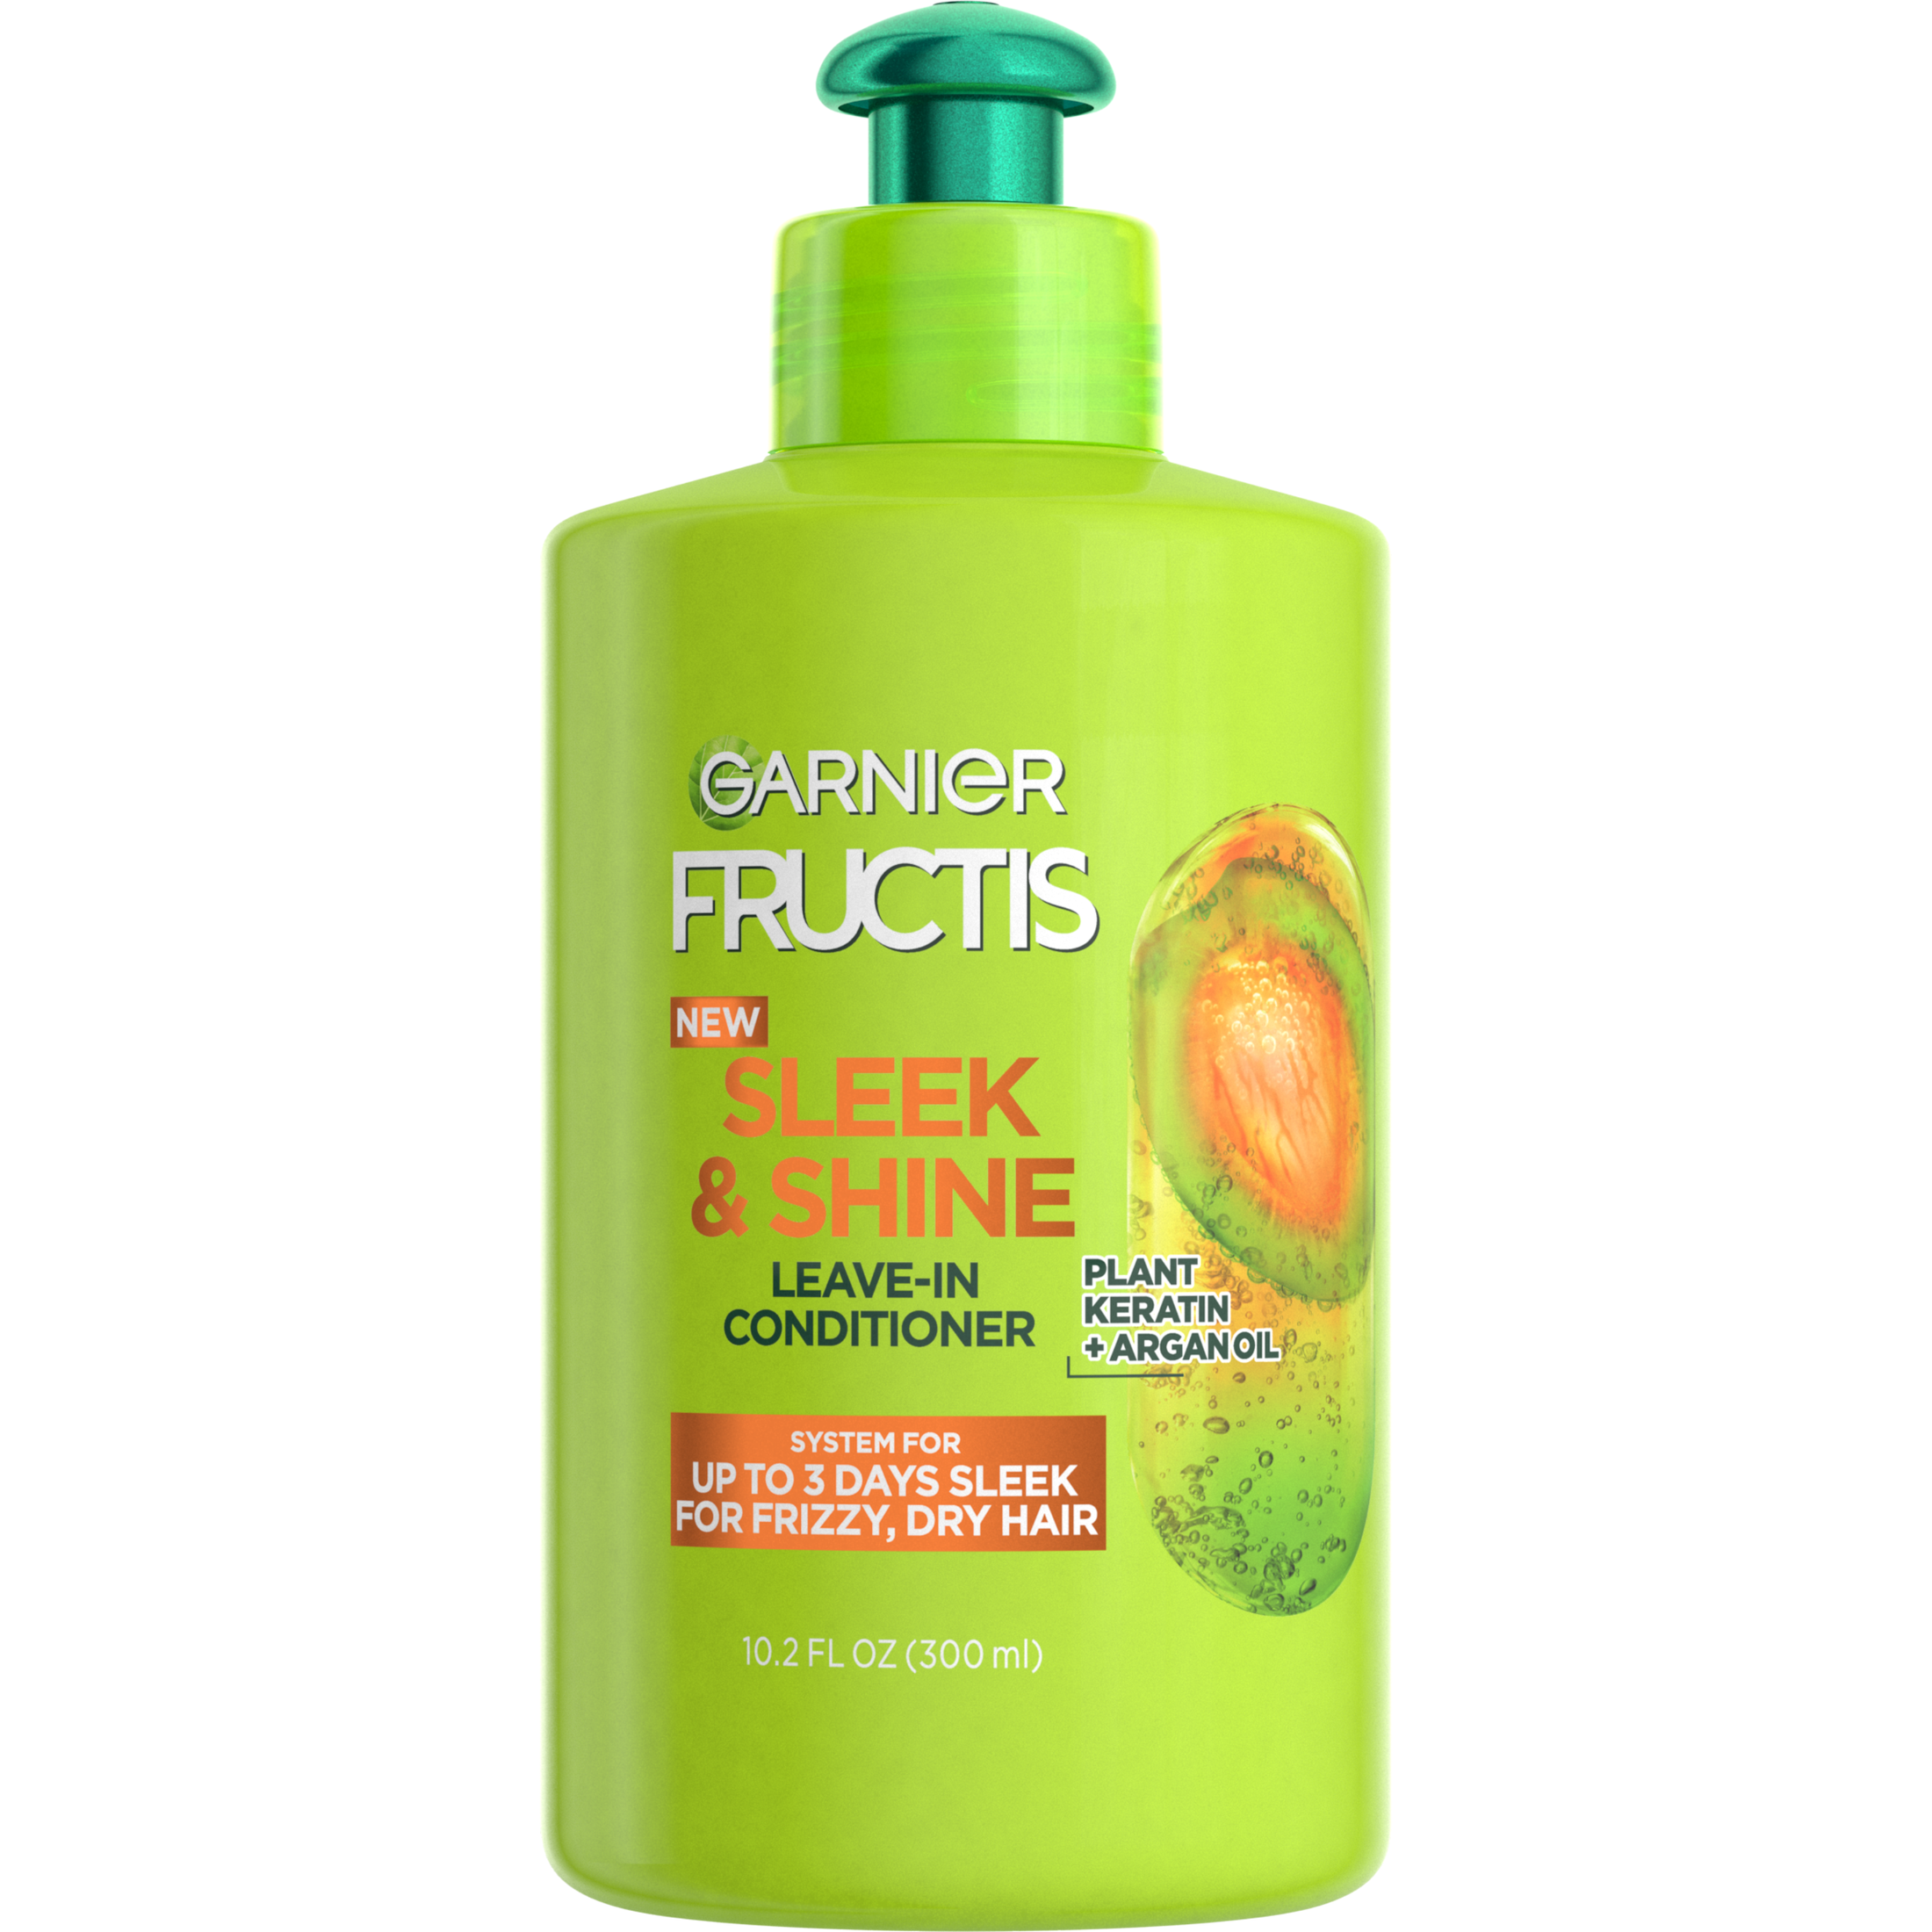 Garnier Fructis Sleek and Shine Leave In Conditioner with Argan Oil, 10.2 fl oz - image 1 of 9